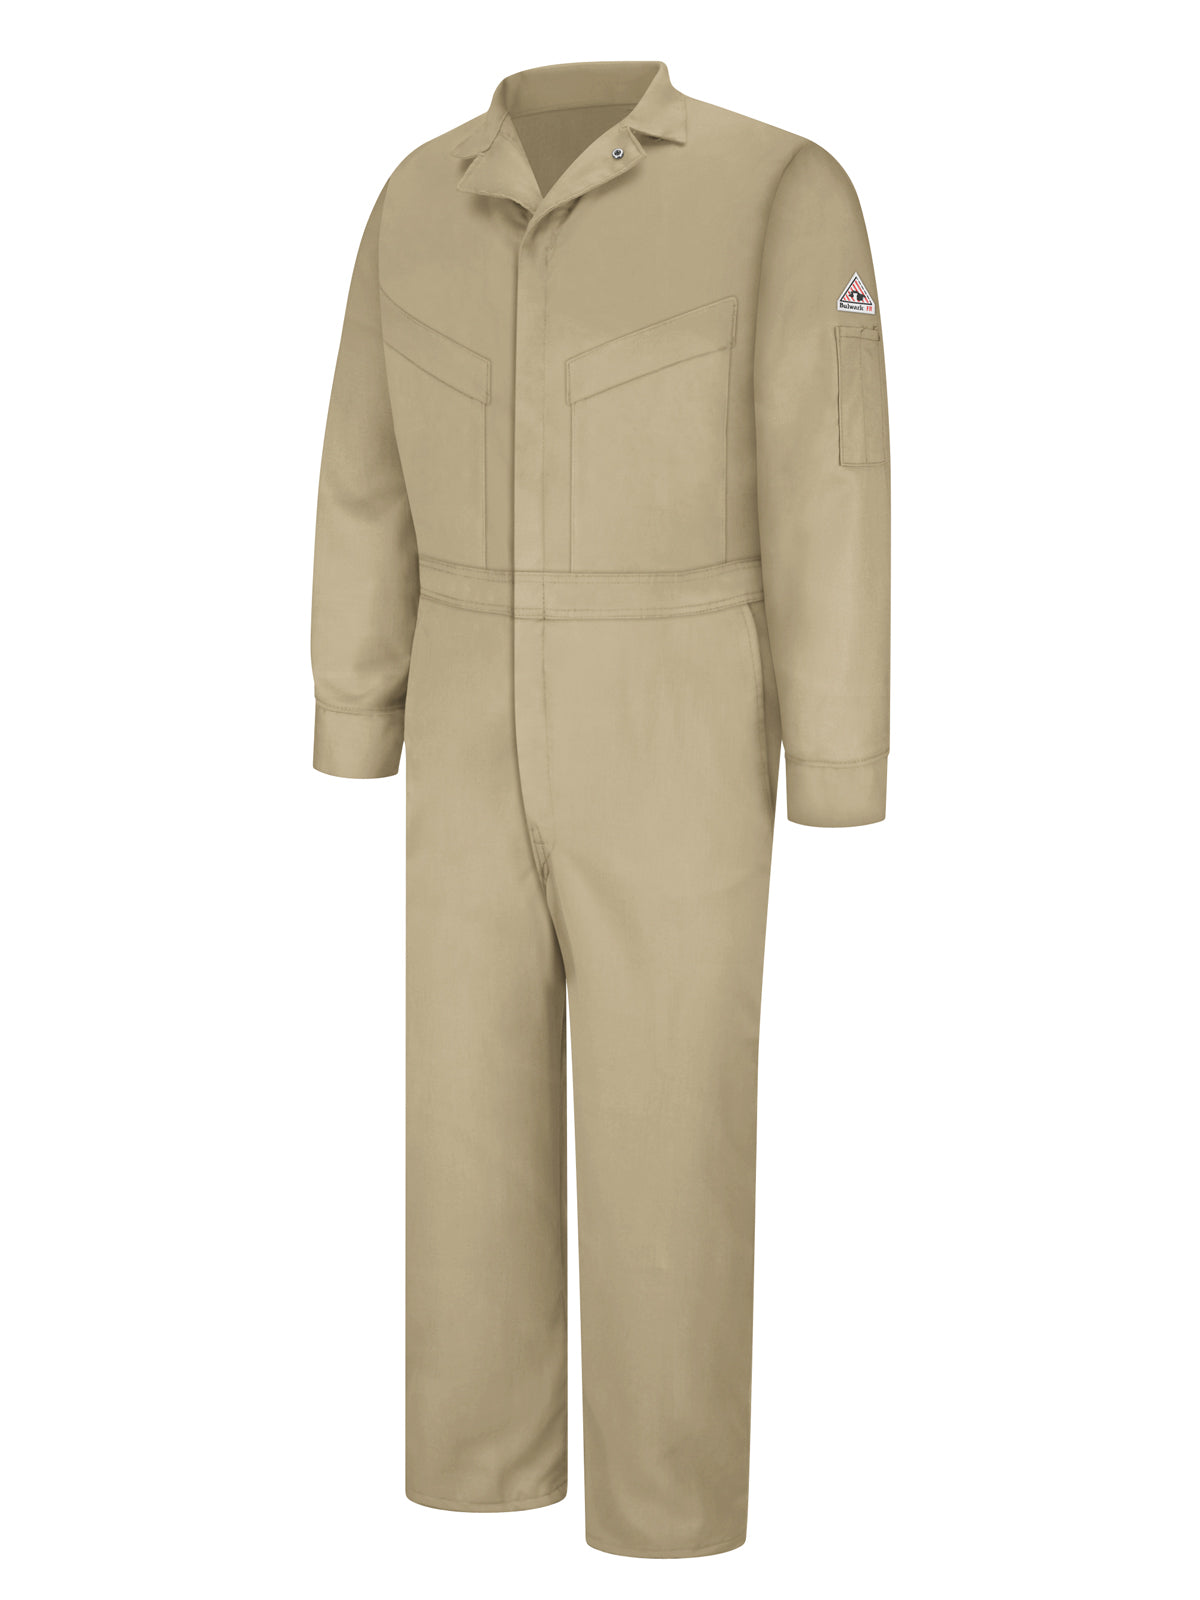 Men's Lightweight Excel Flame-Resistant Deluxe Coverall - CLD4 - Khaki